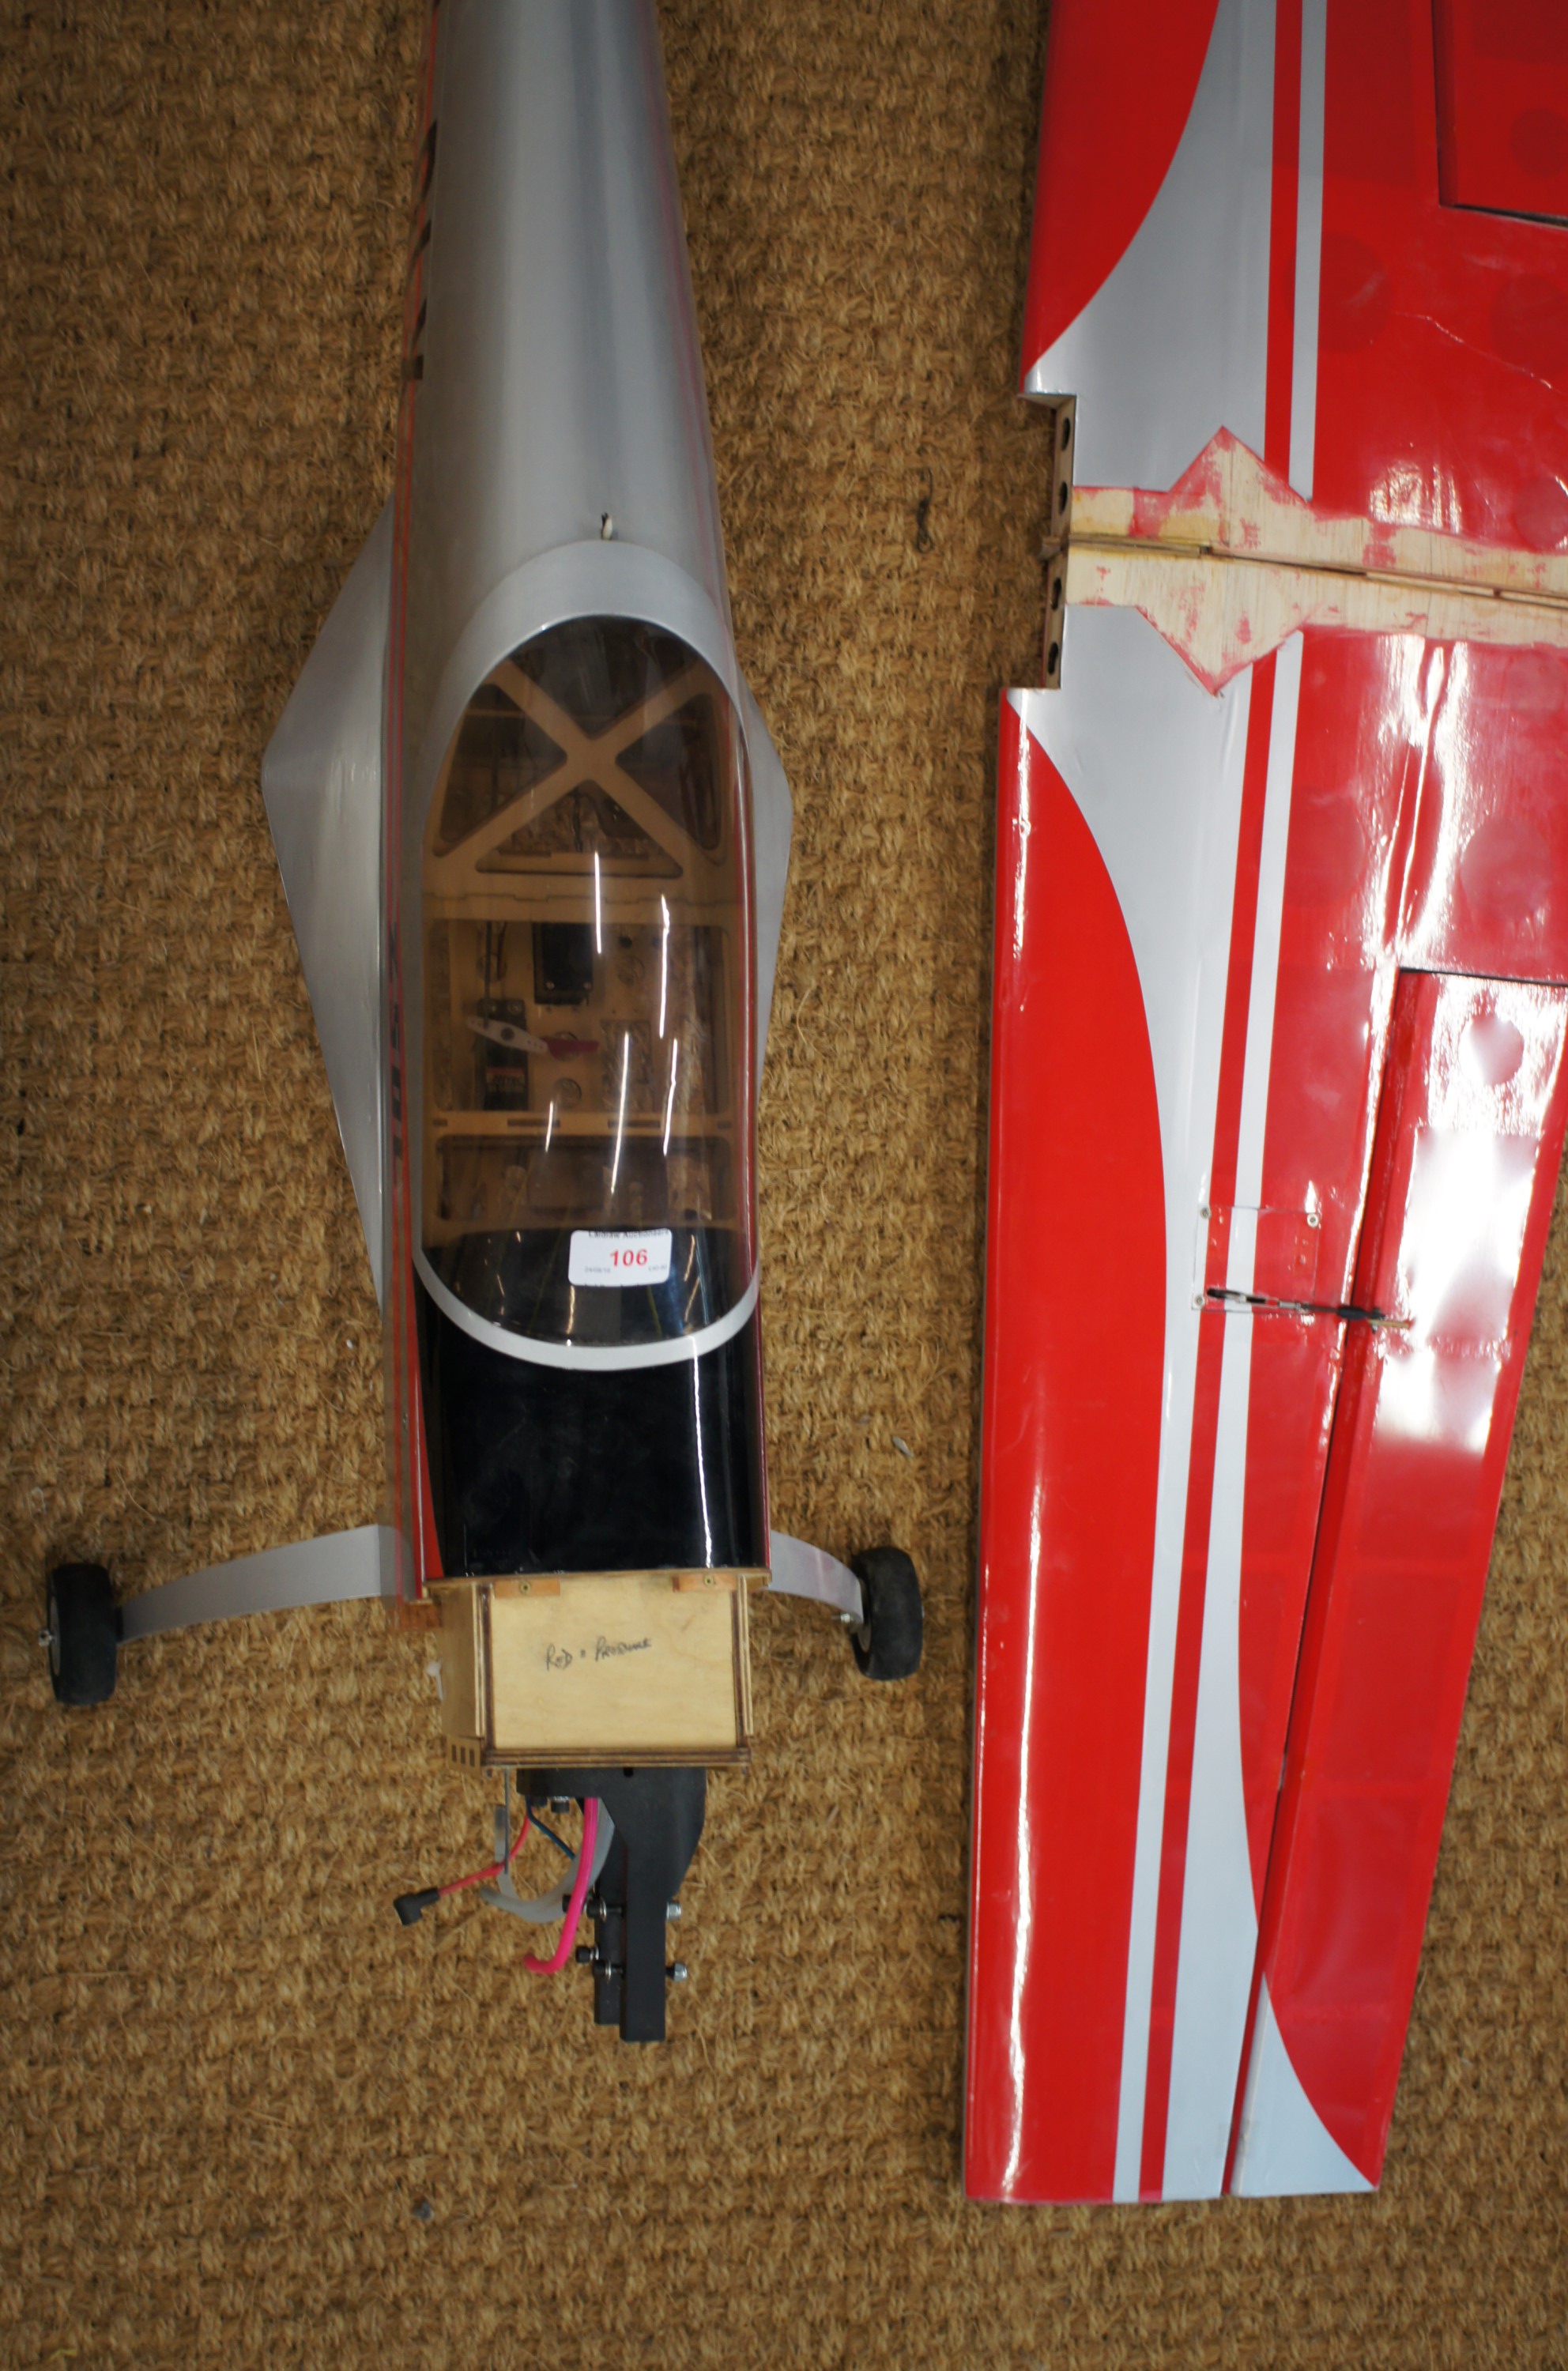 A large remote control model aircraft silver and red EC-DLX wingspan 63" (160 cm) Length 4' (122